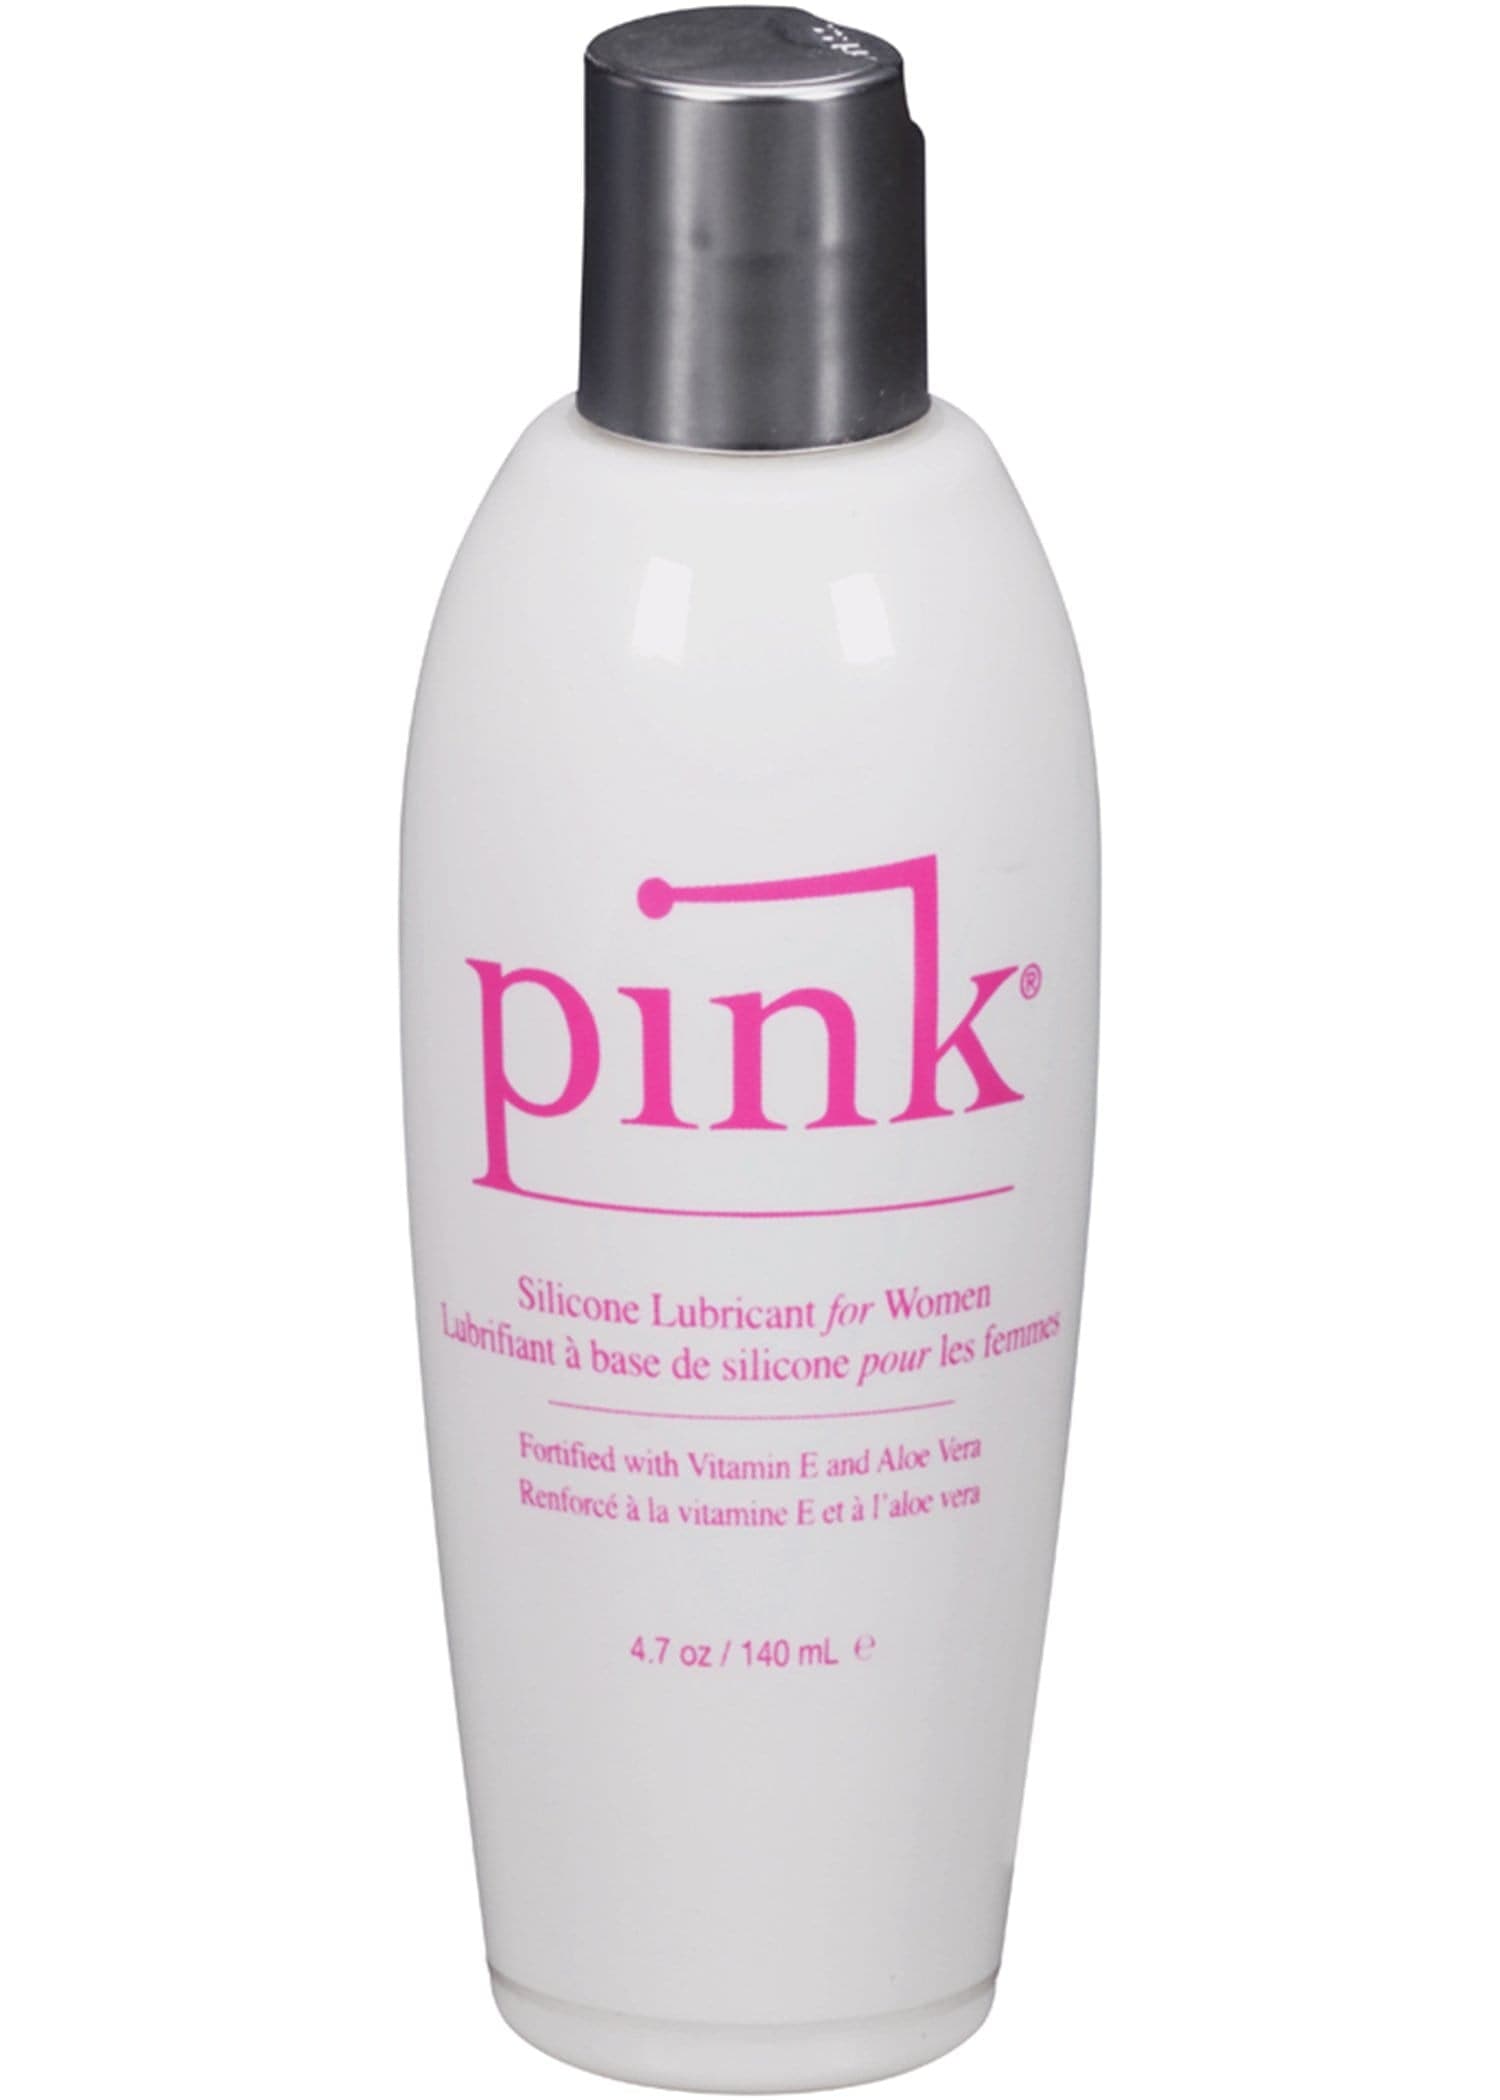 pink silicone lubricant for women 4 7 oz 140 ml